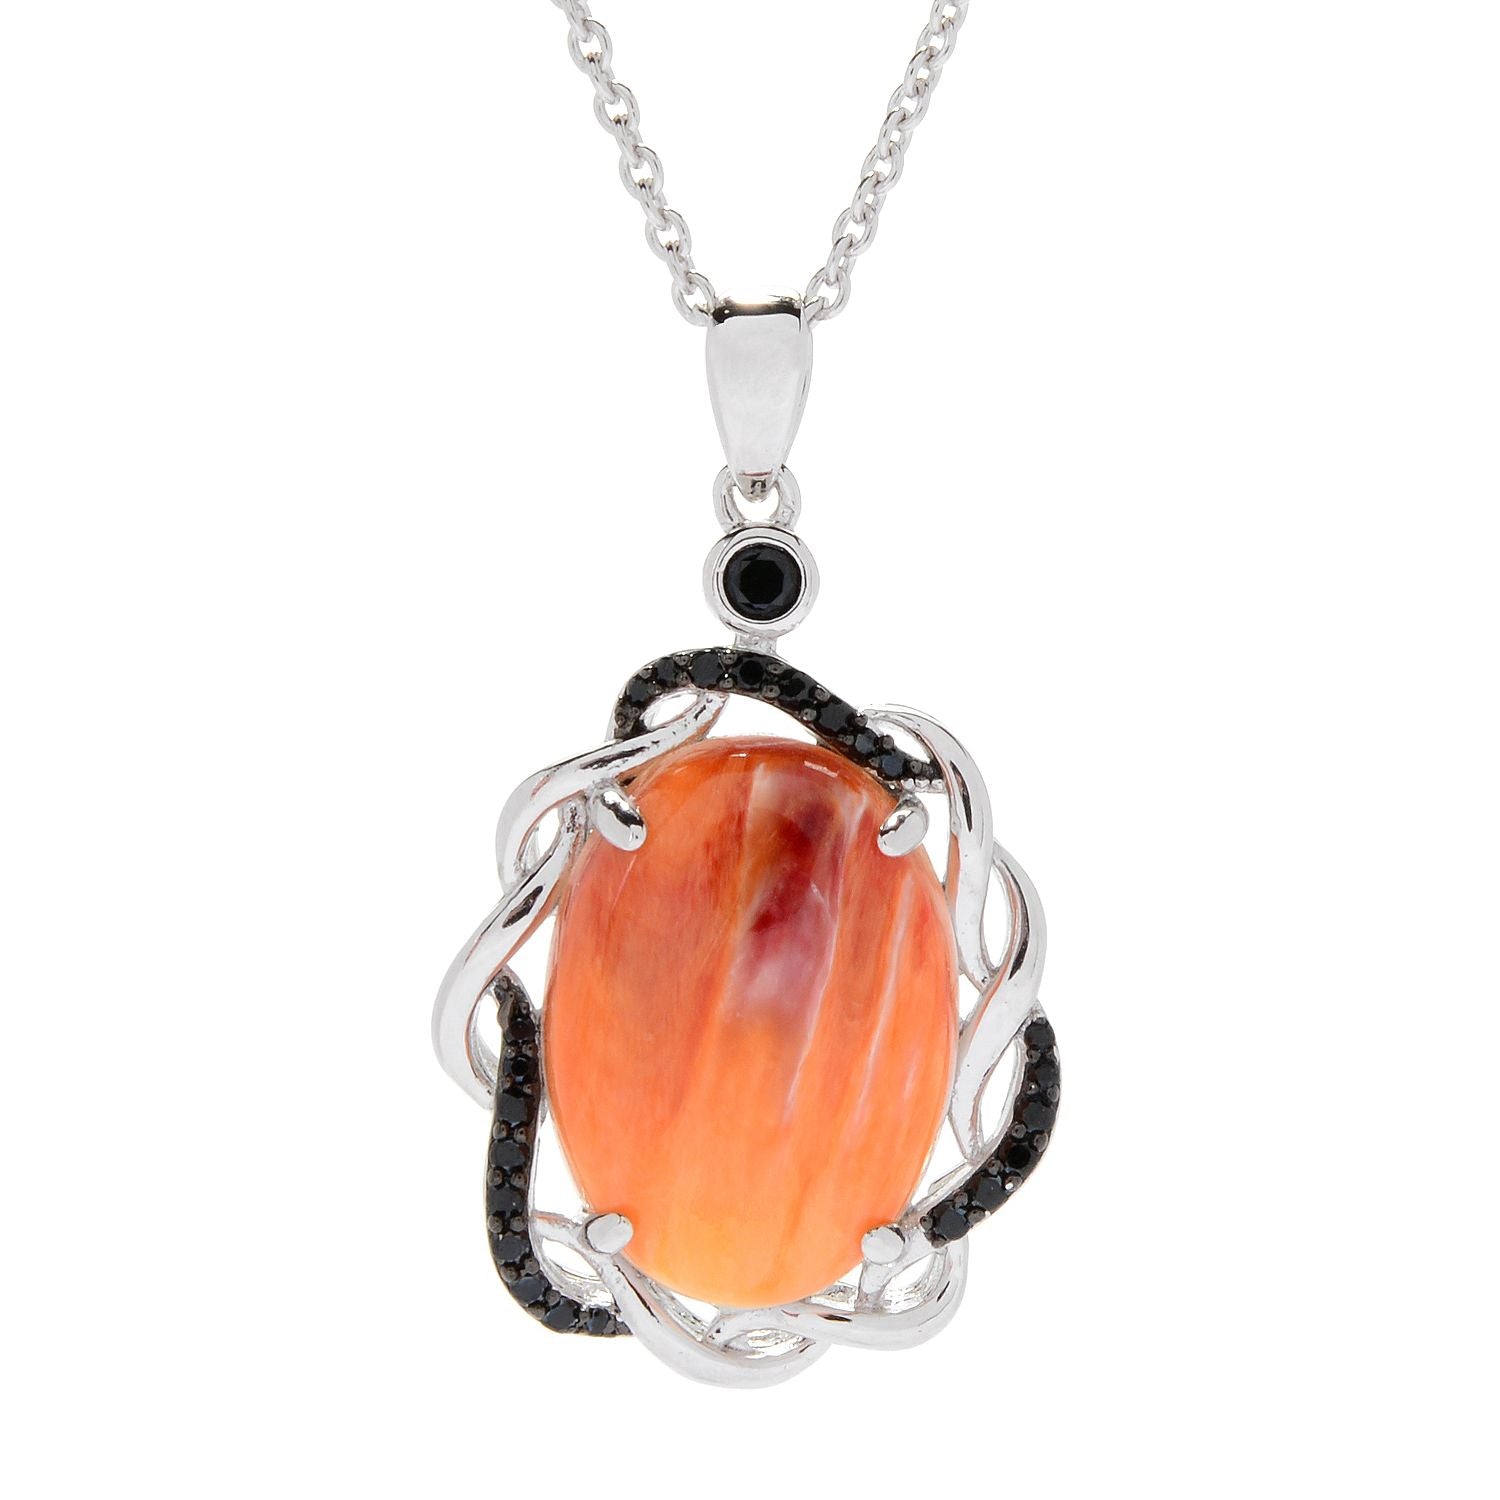 Pinctore Sterling Silver Oval Orange Spiny Oyster & Black Spinel Pendant w/ 18" Chain - pinctore